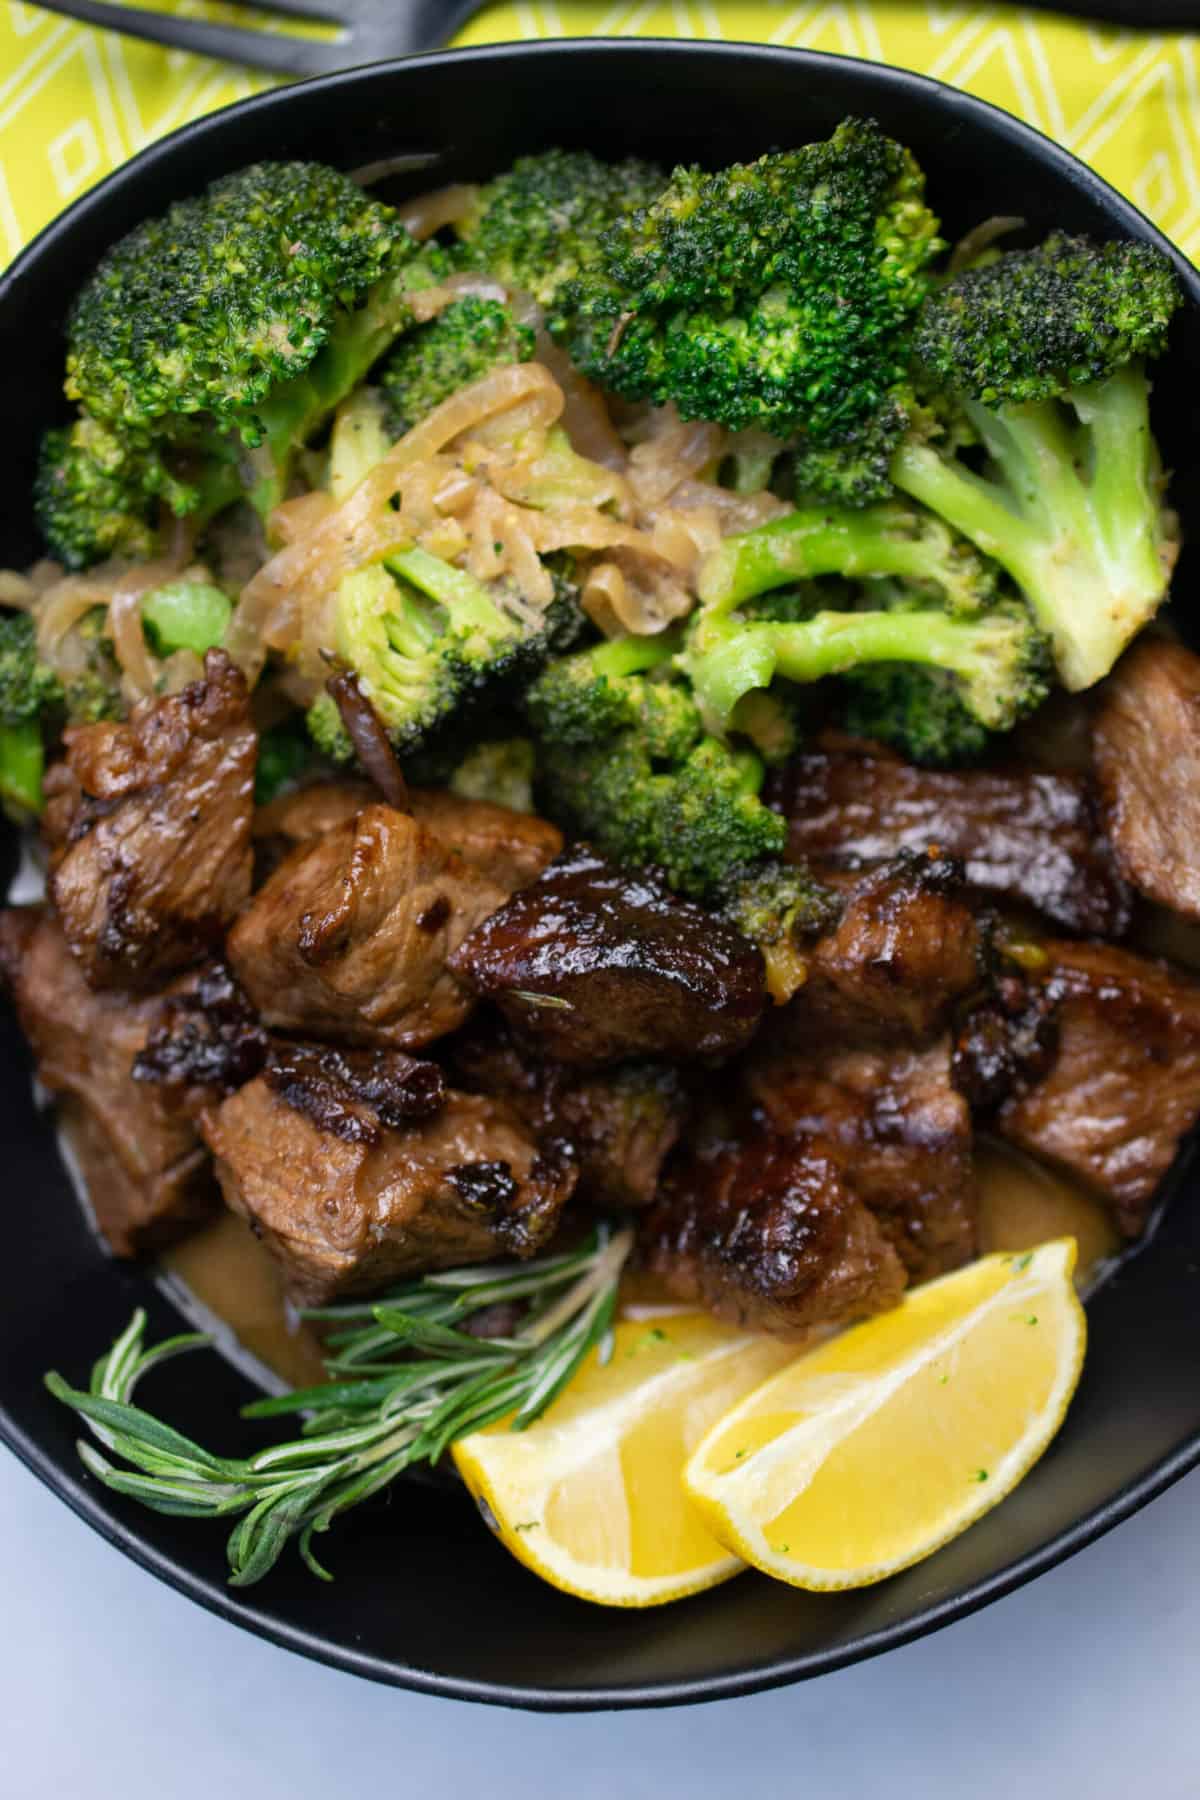 AIP lemon herb beef and broccoli close up. garnished with onion, rosemary sprig, and lemon wedges